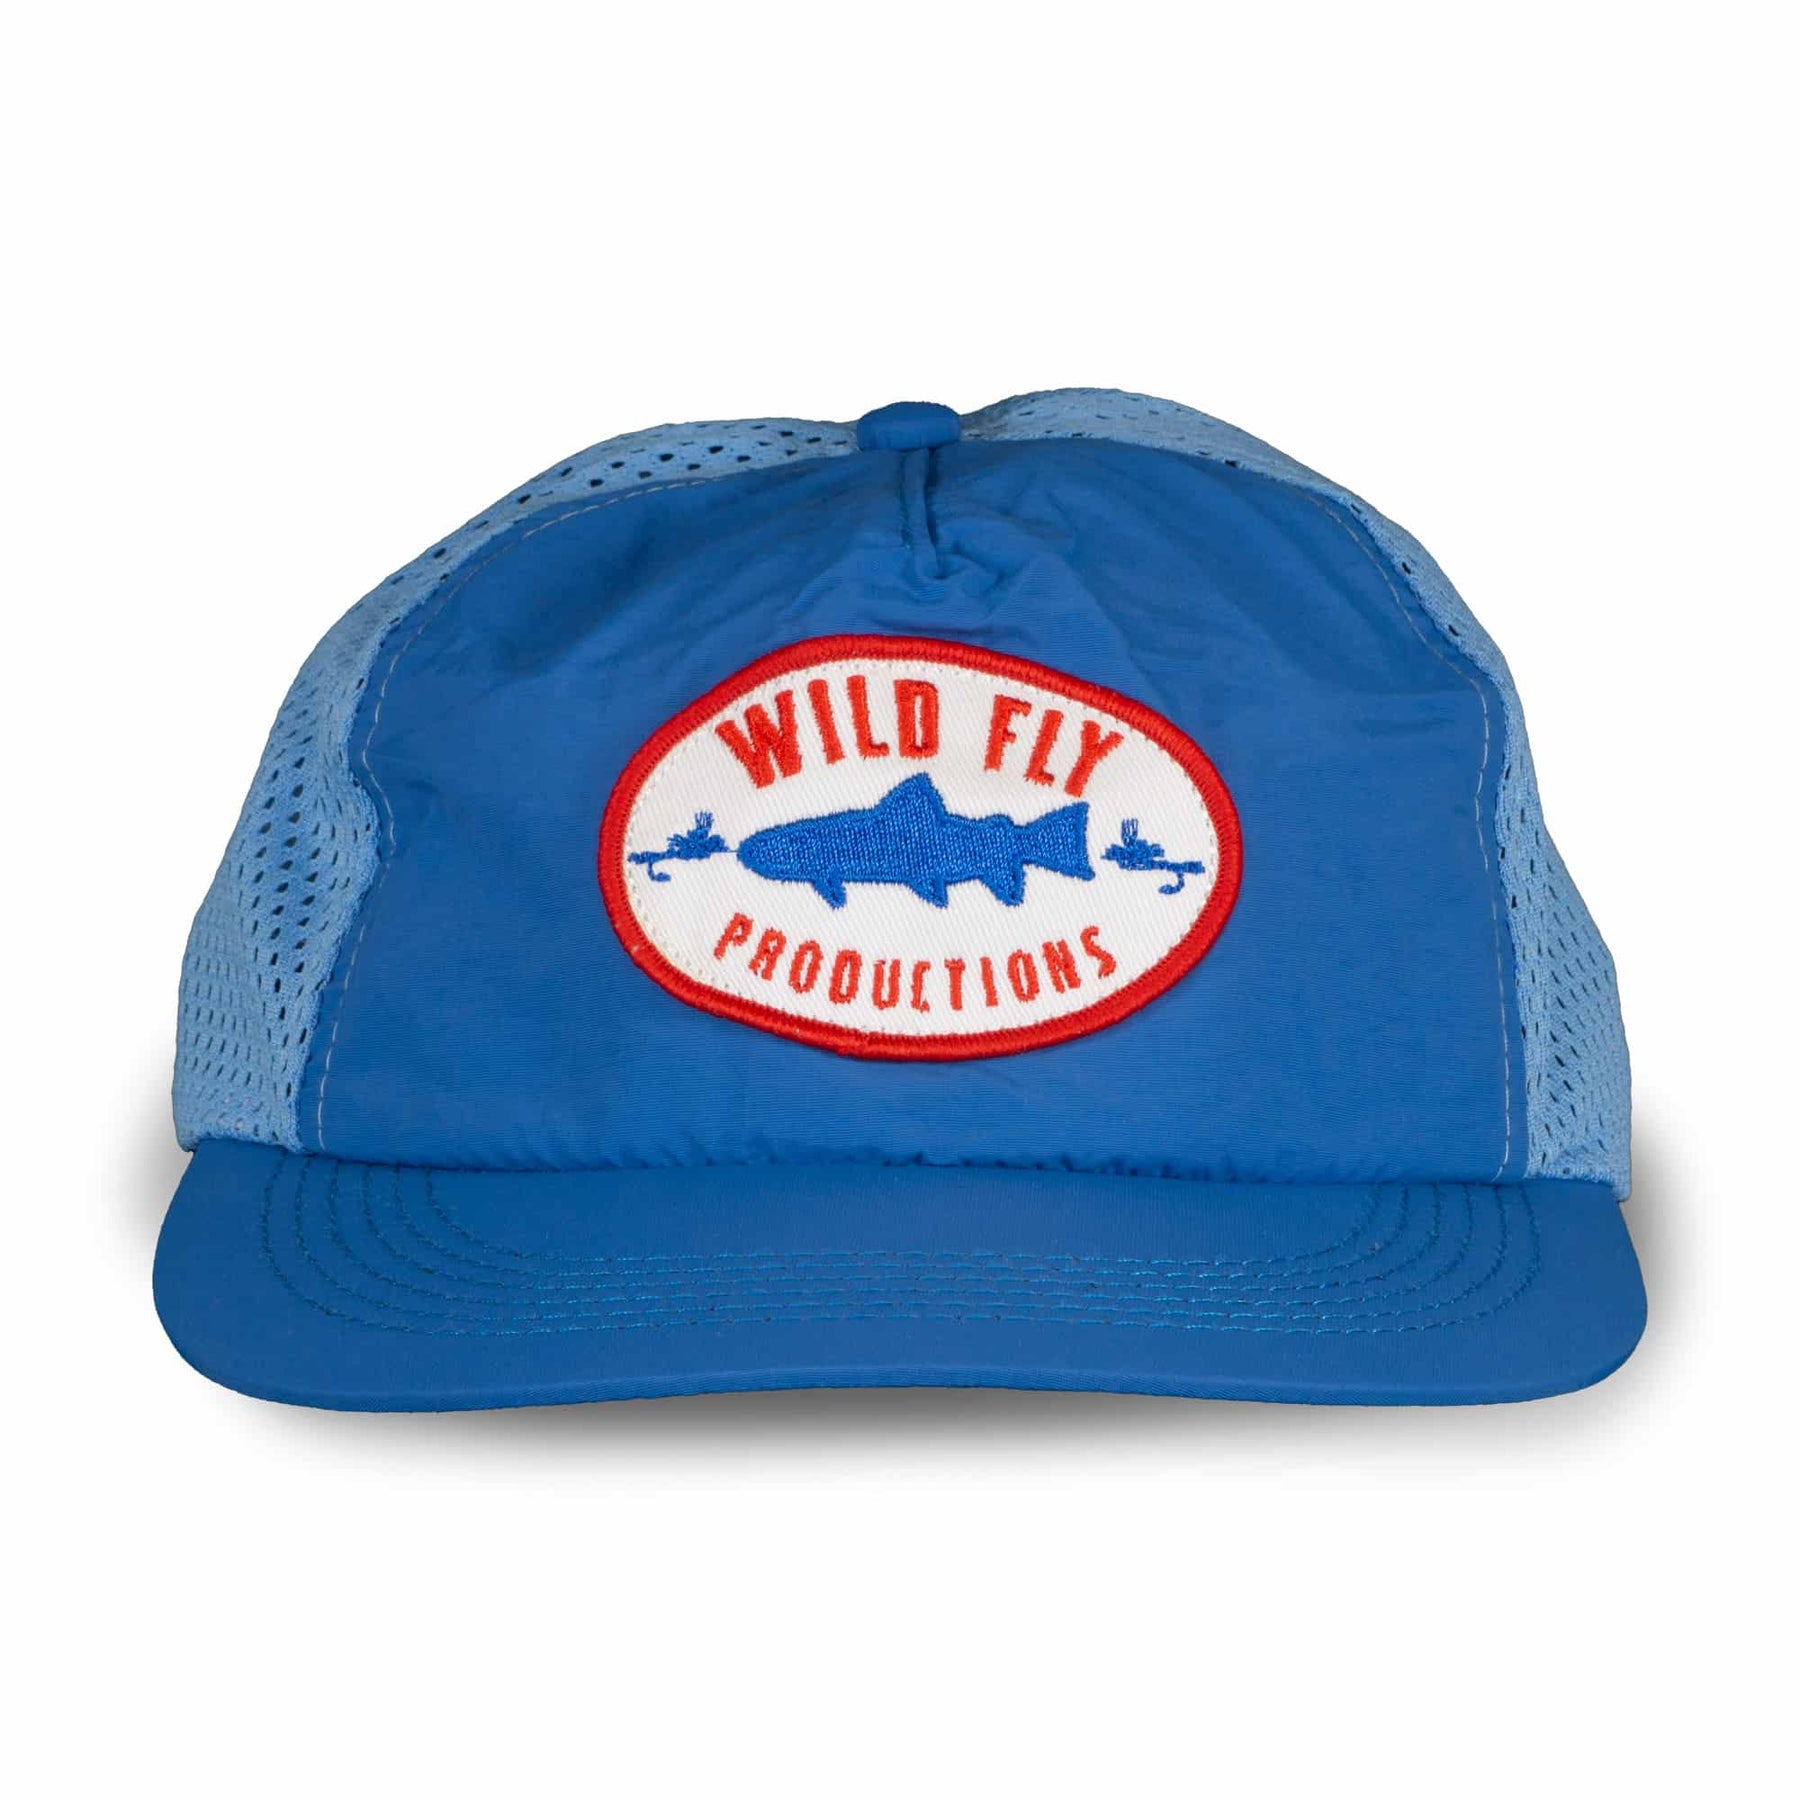 Profile Performance Hat - Red/White/Blue – Wild Fly Productions